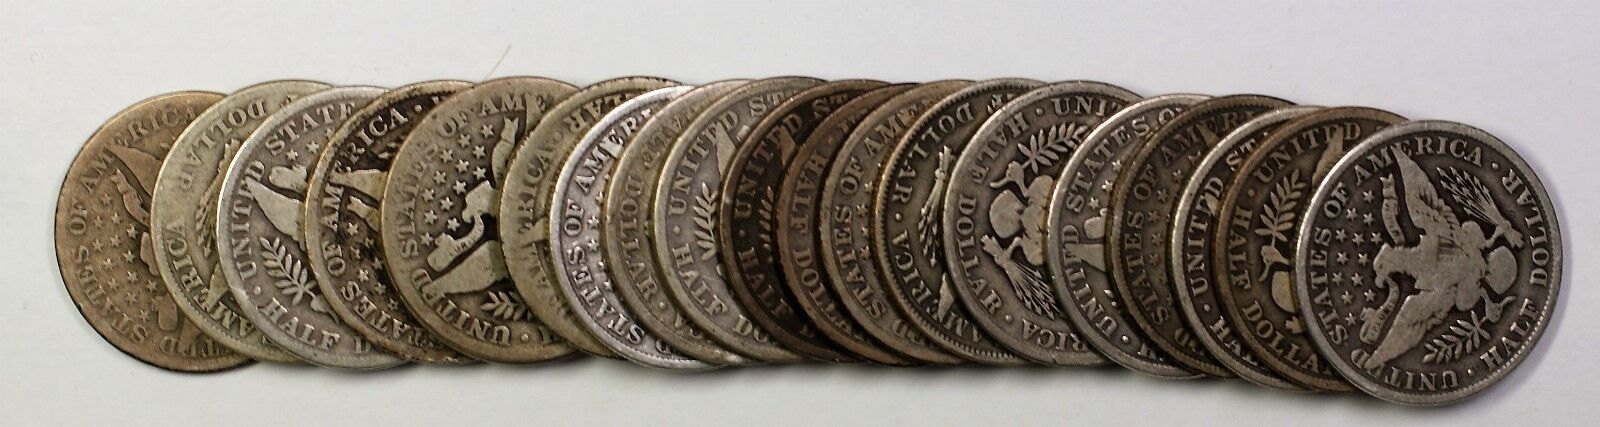 1907 Barber Half Dollar 50c Roll 20 Circulated 90% Old Silver Coins Lot